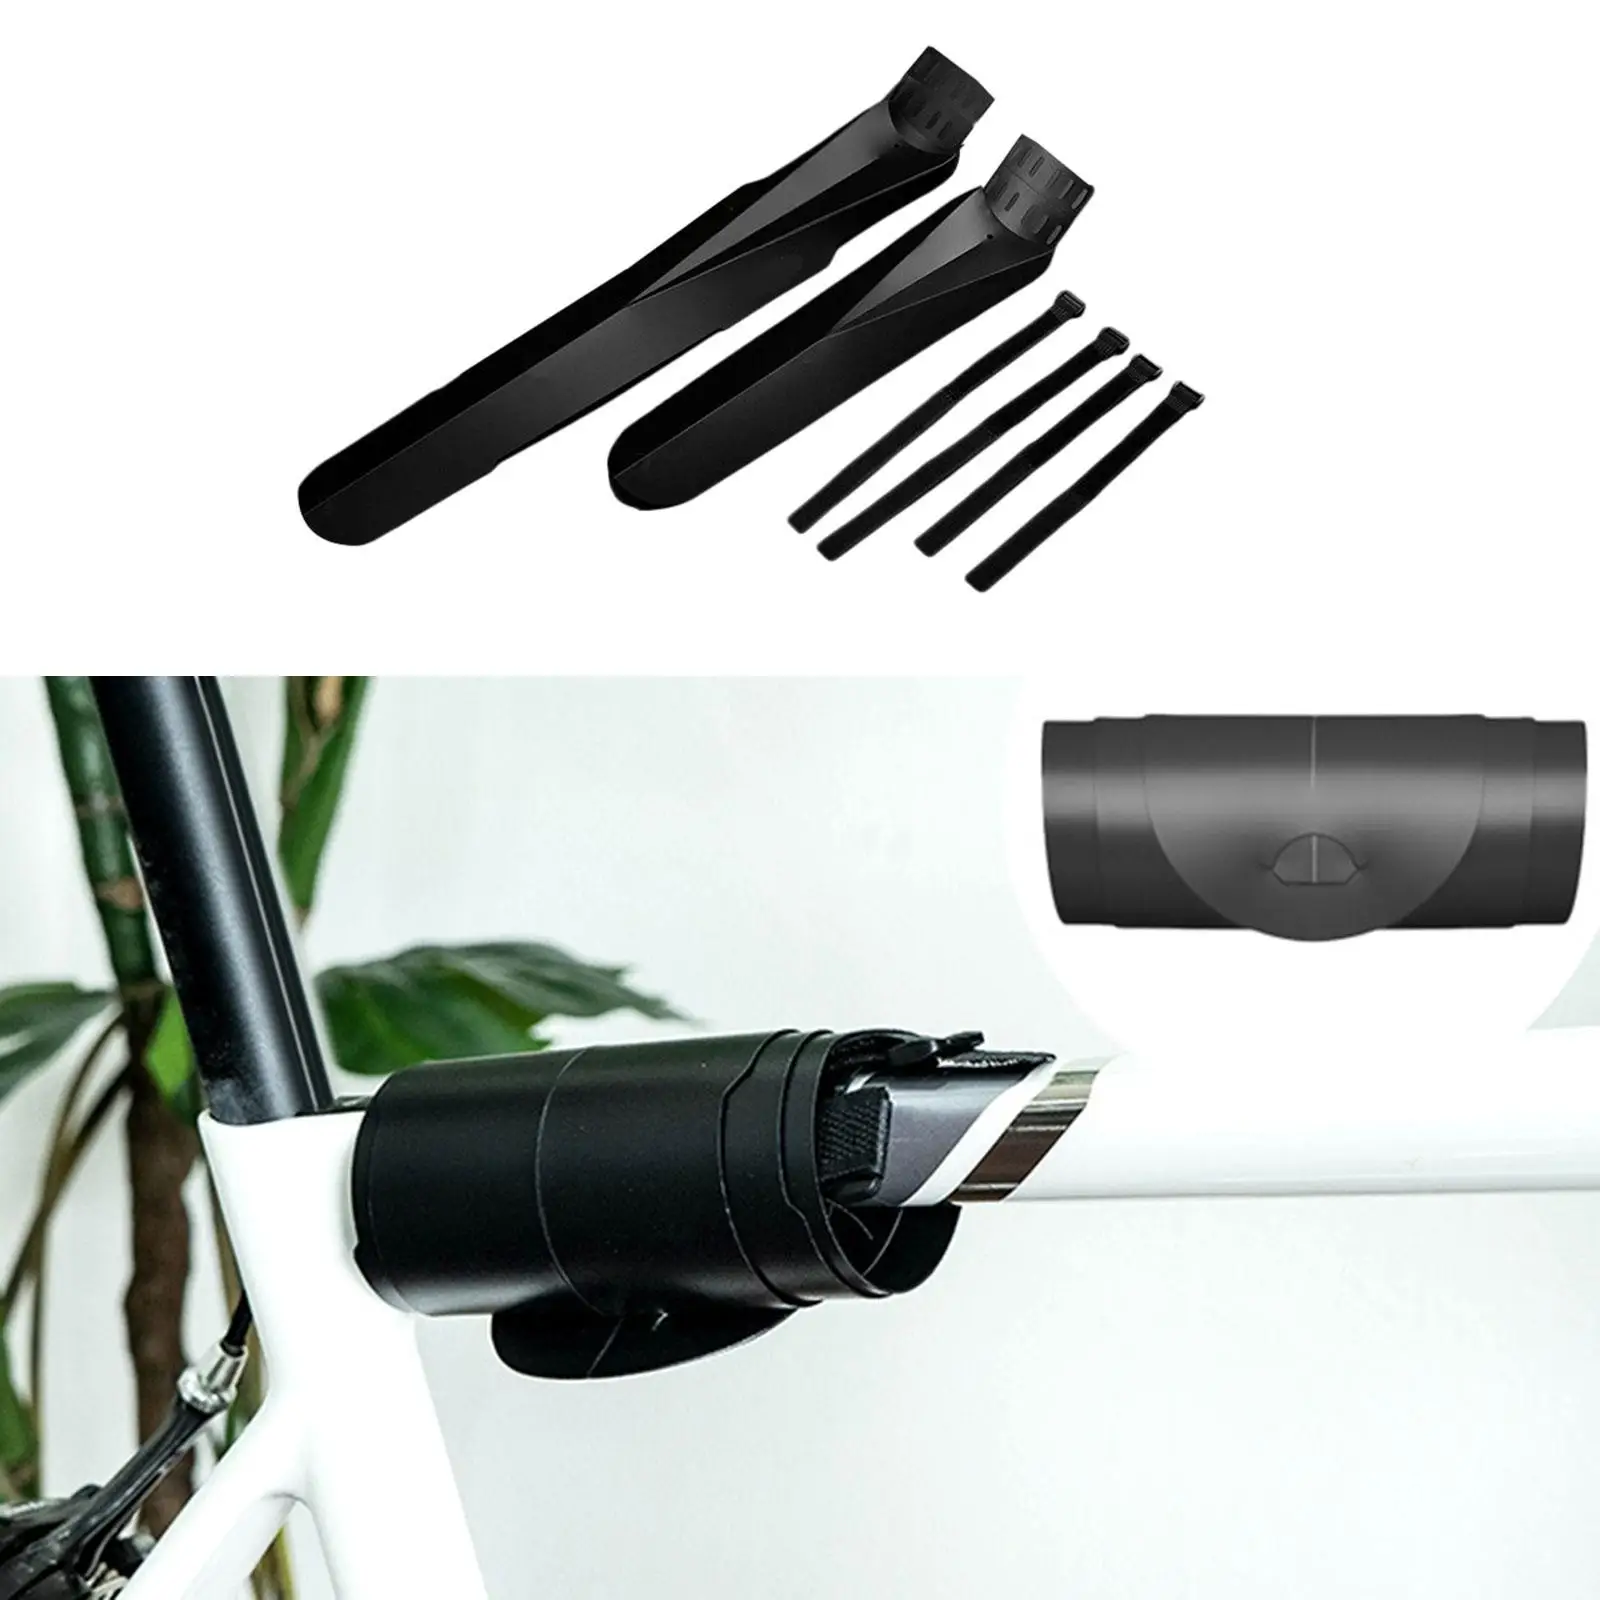 Front Rear Set Foldable Easy to Install Fittings Parts Tool DIY Bike Mudguard